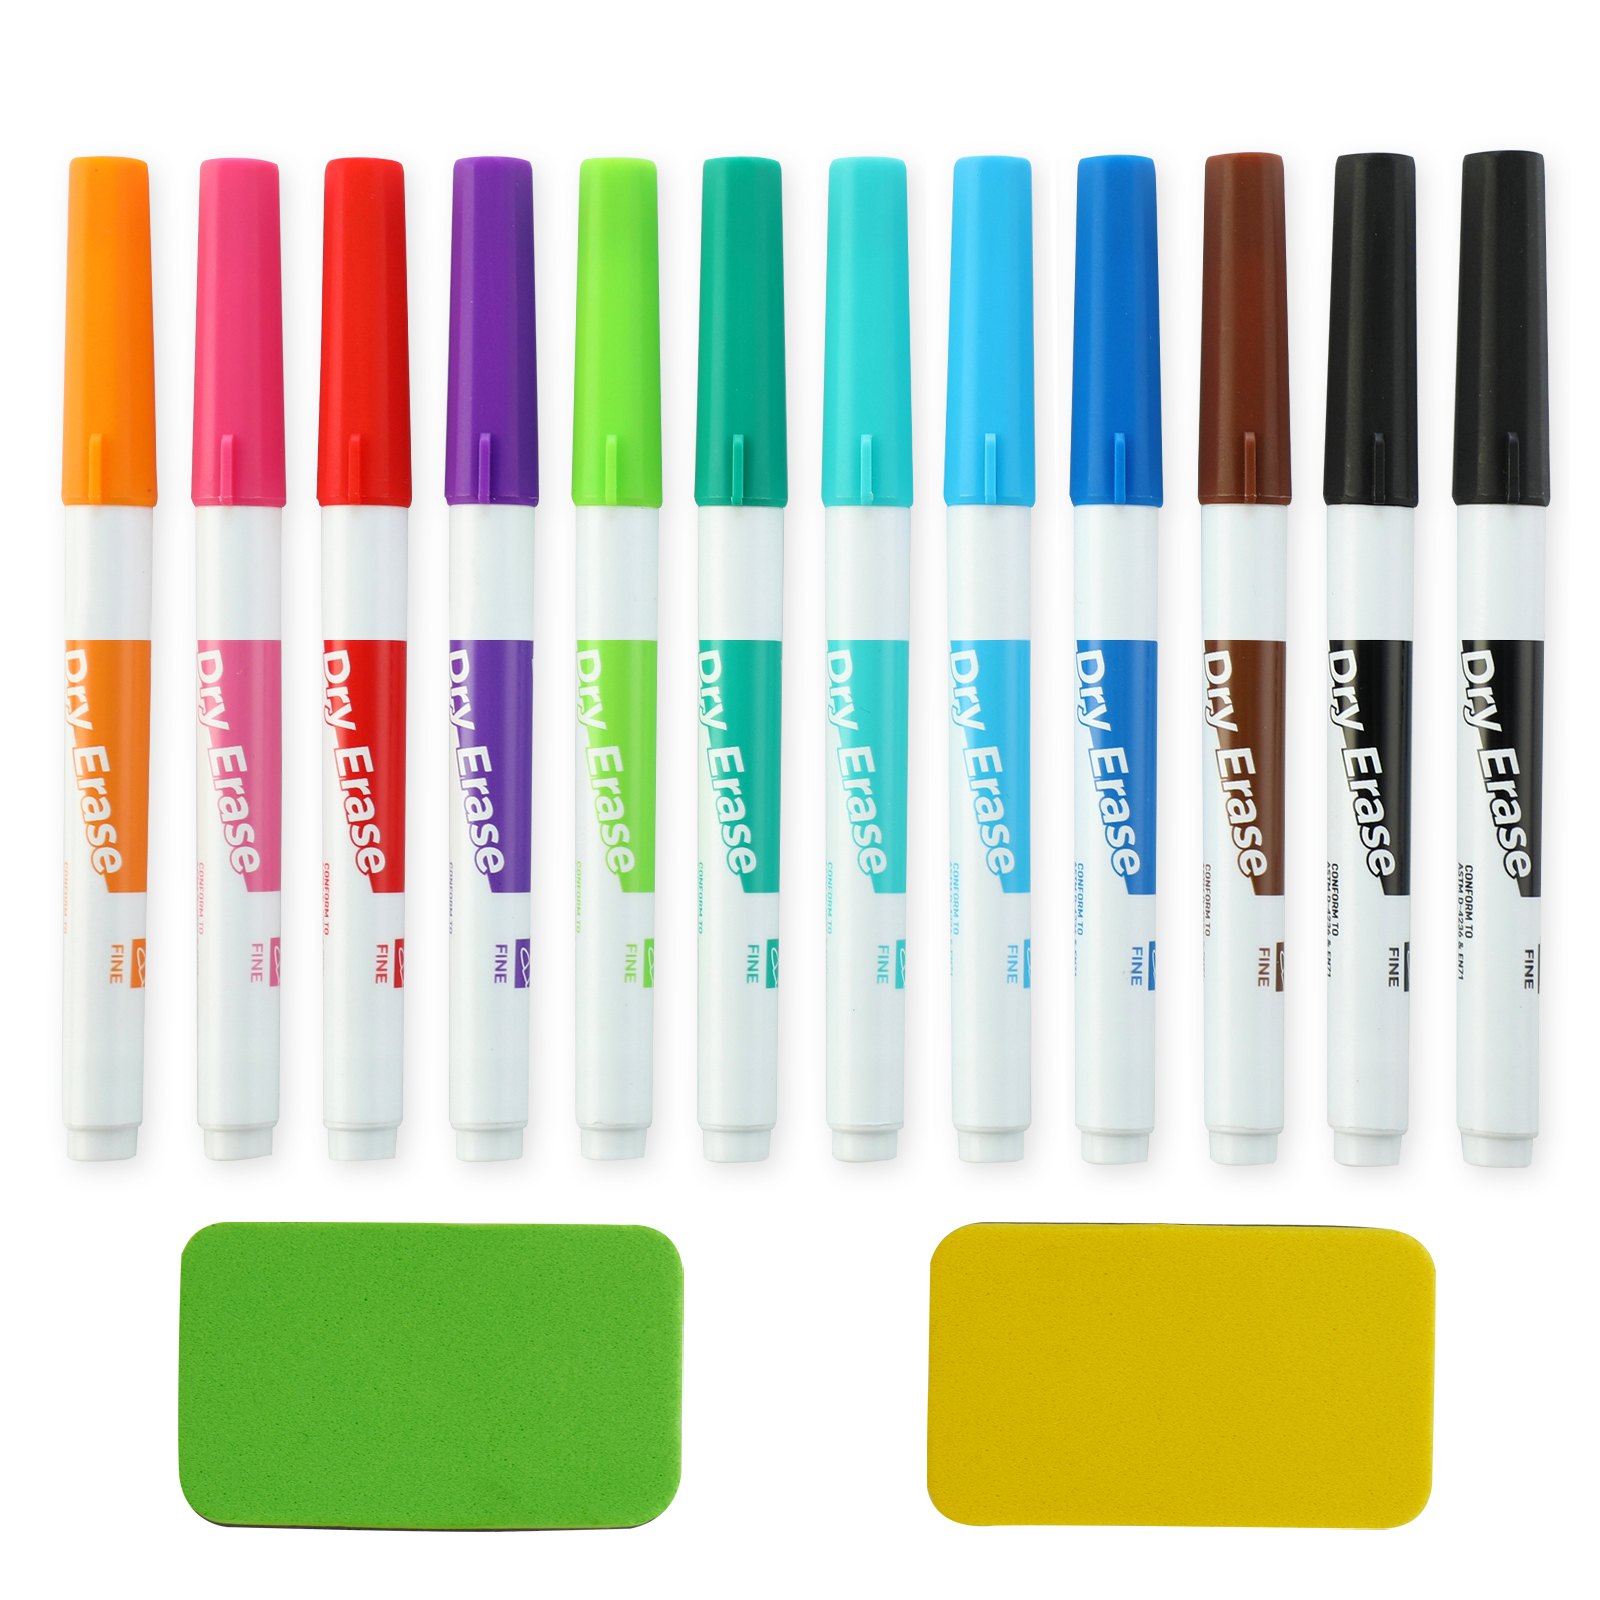 TWOHANDS Dry Erase Markers with 2 Eraser, 11 Colors,20512